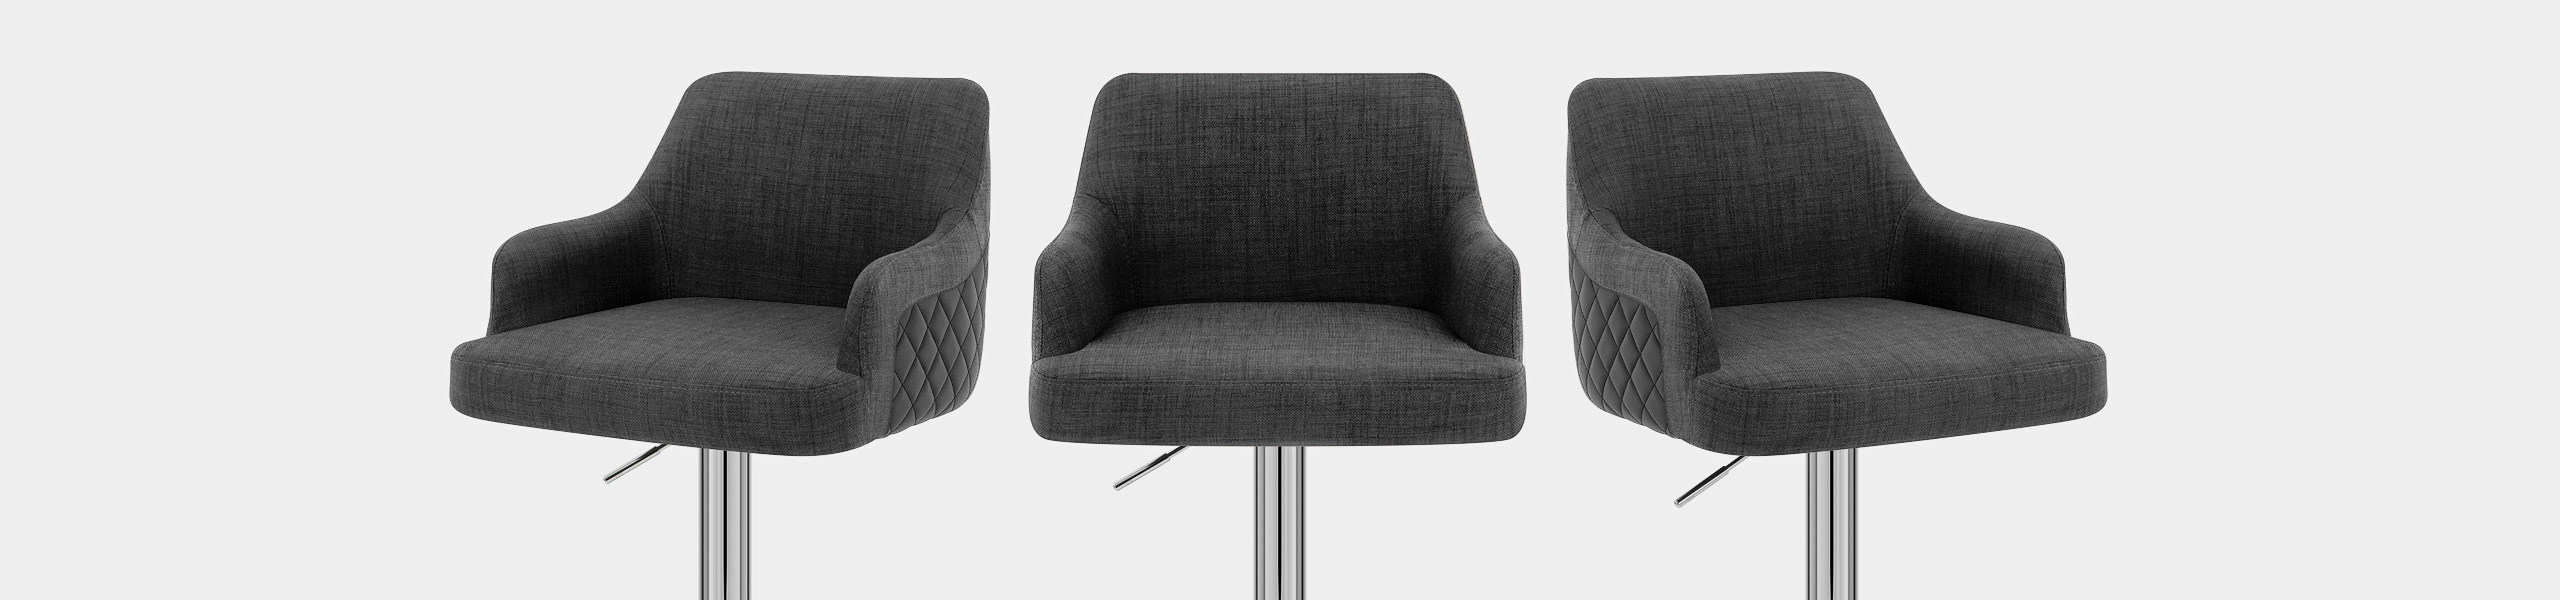 Dylan Stool Black Leather & Charcoal Fabric Video Banner